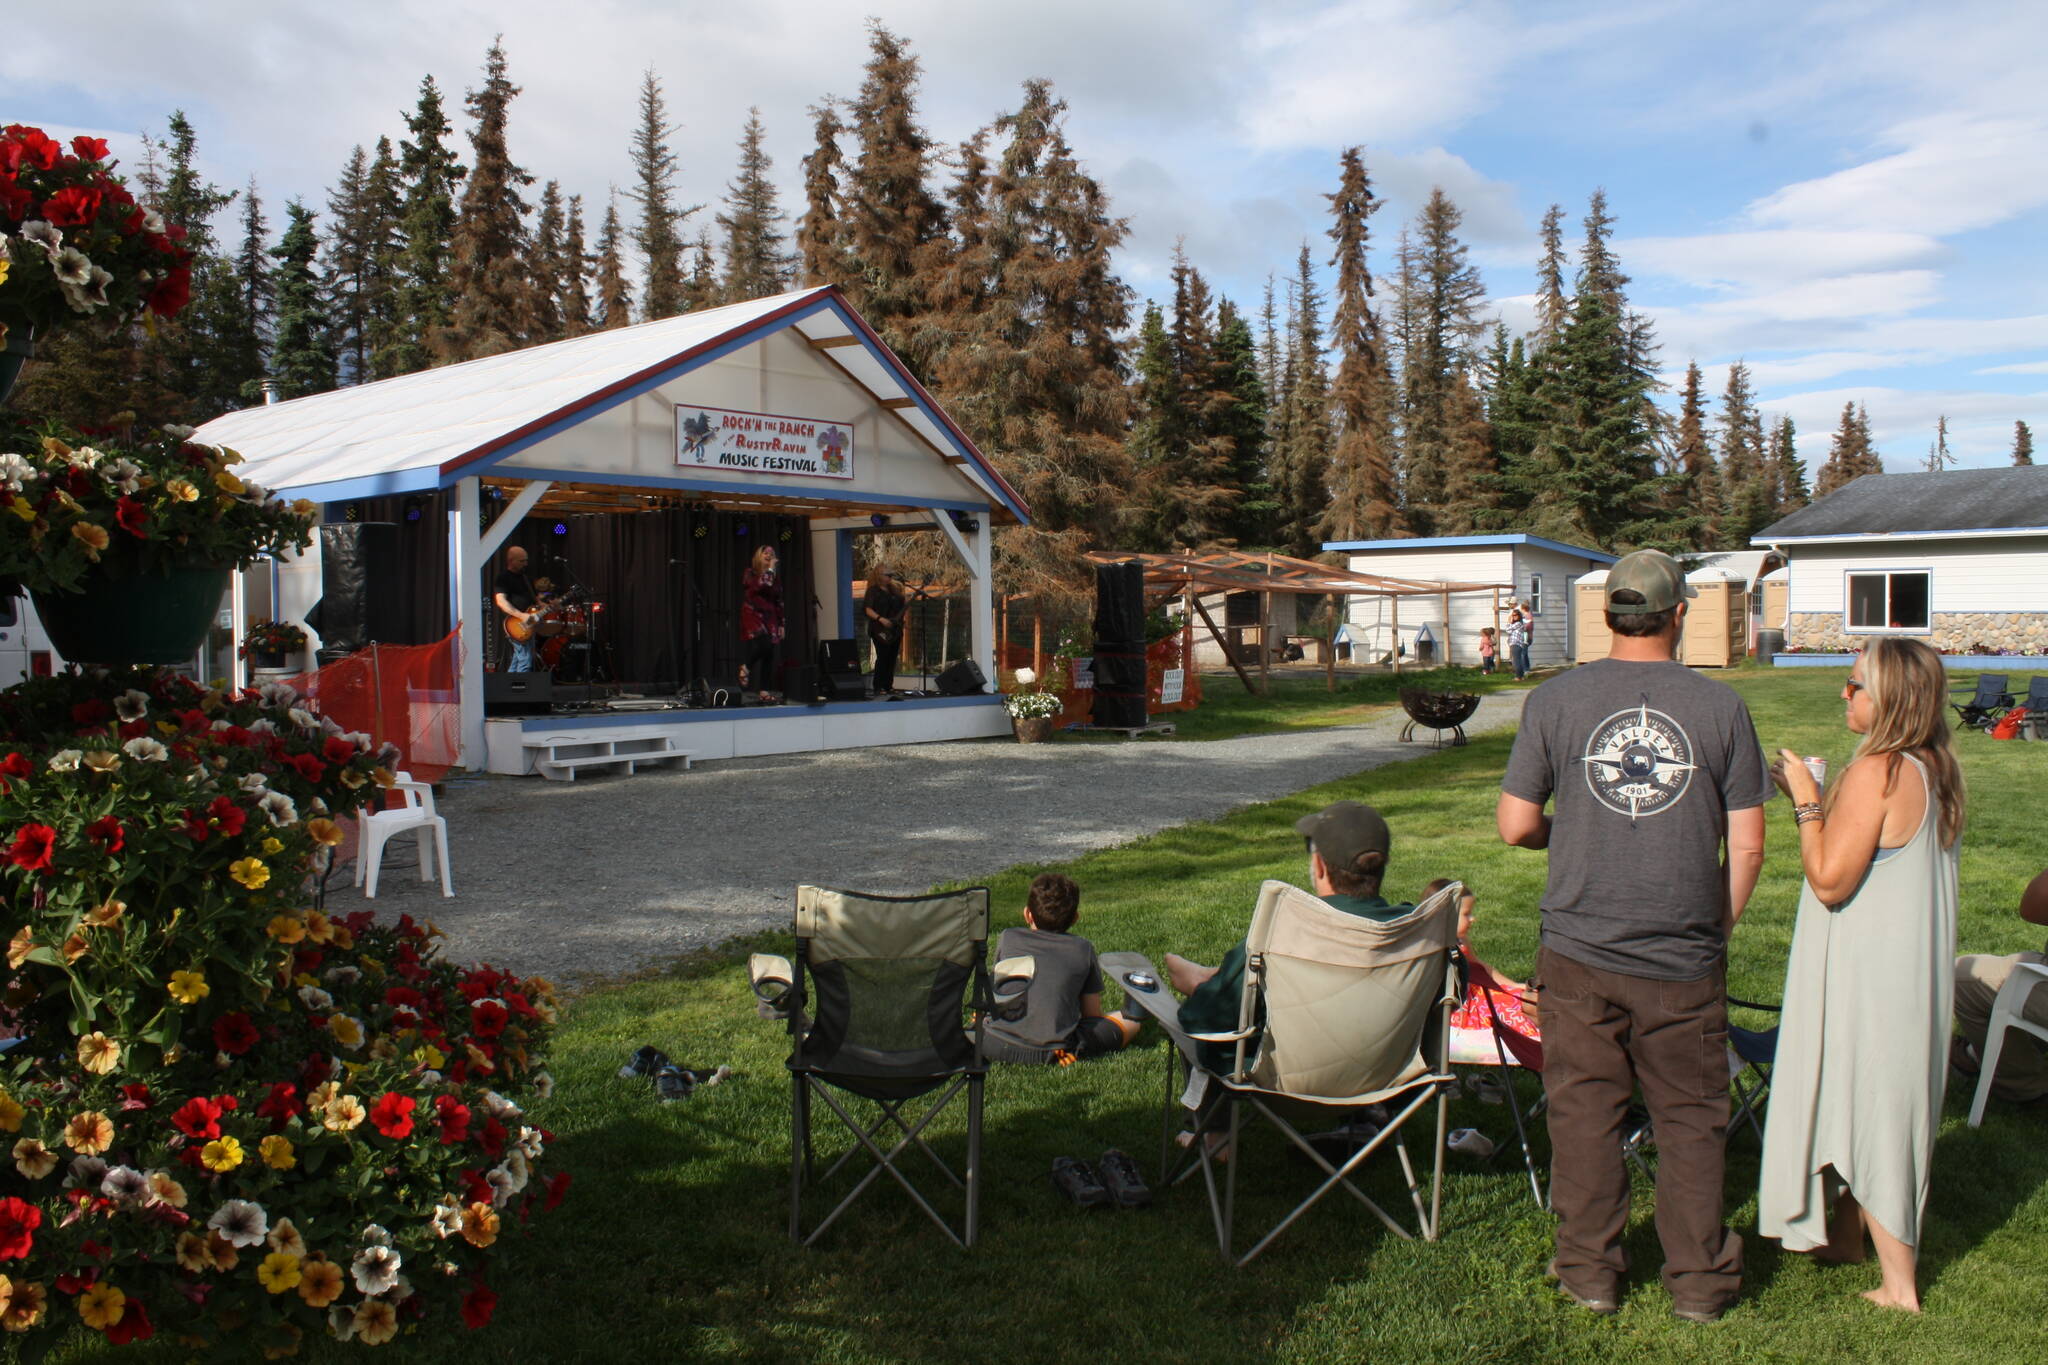 Community members attend the Rock’N the Ranch at the Rusty Ravin Music Festival in Kenai, Alaska, on Friday, July 8, 2022. (Camille Botello/Peninsula Clarion)